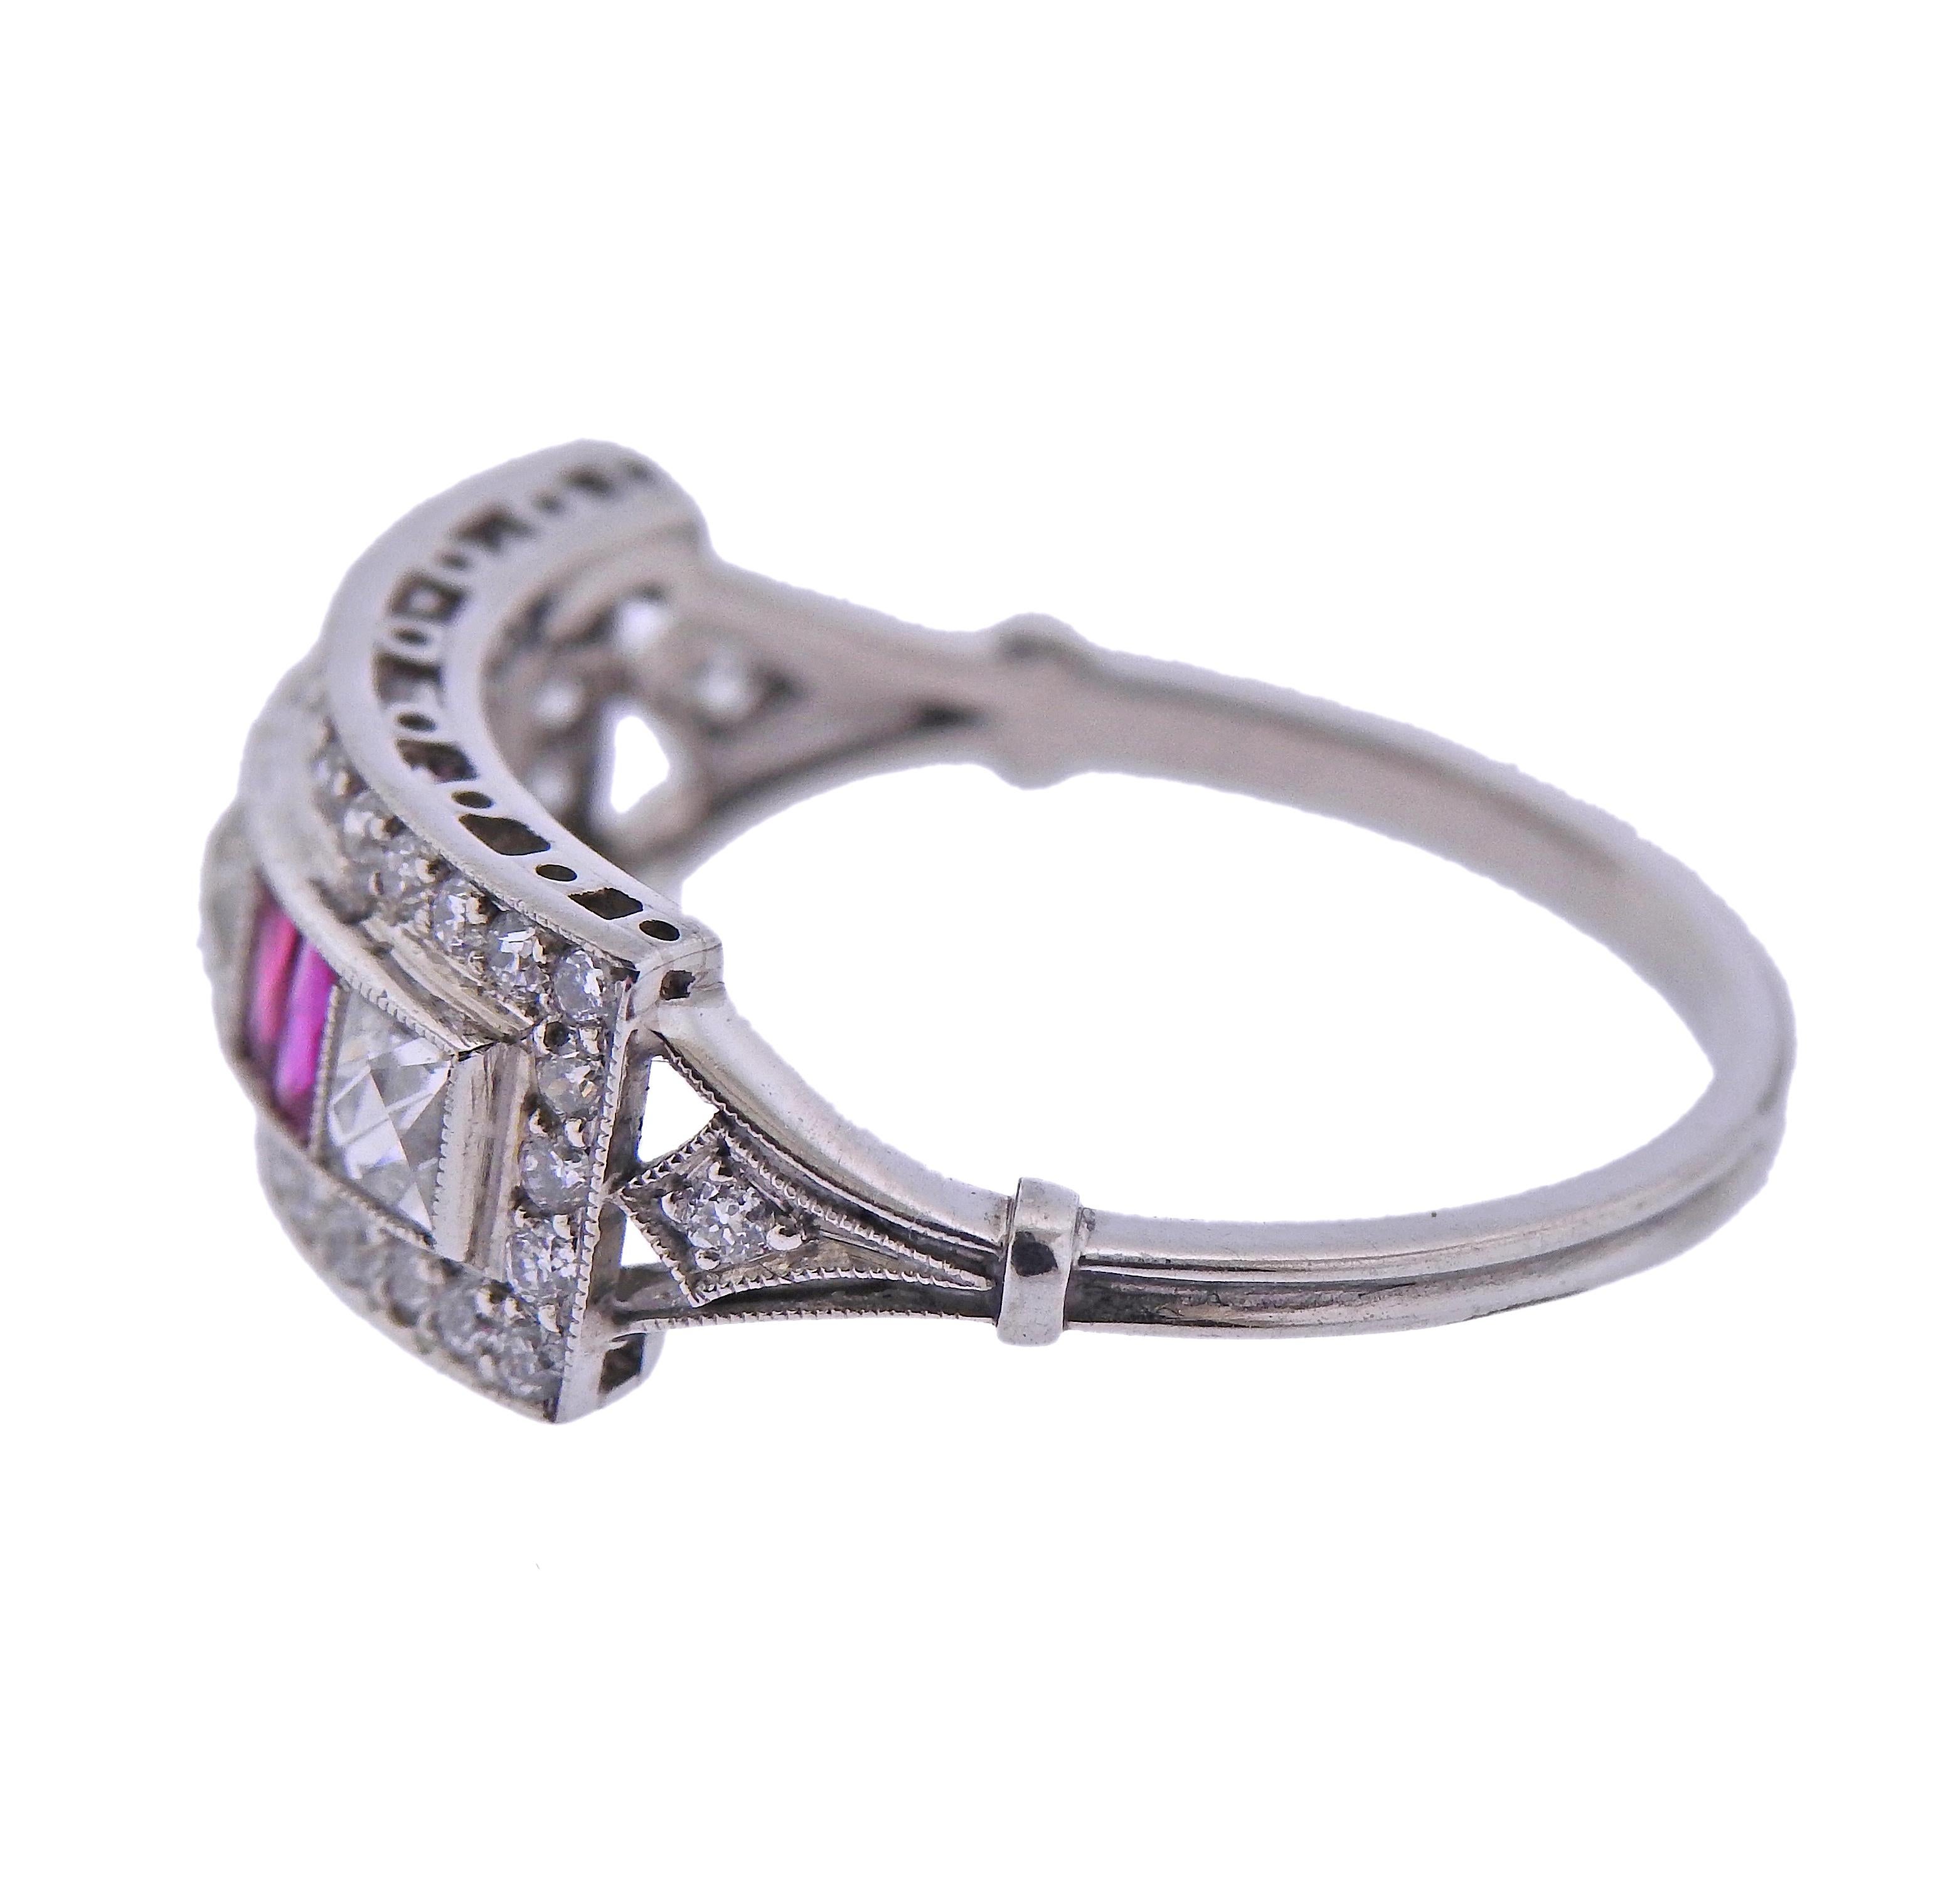 Platinum ring, with French cut rubies and diamonds, surrounded with round diamonds. Total diamonds approx. 0.54ctw. Ring size - 7.5, ring top is 7.5mm wide. Weight - 3.8 grams.